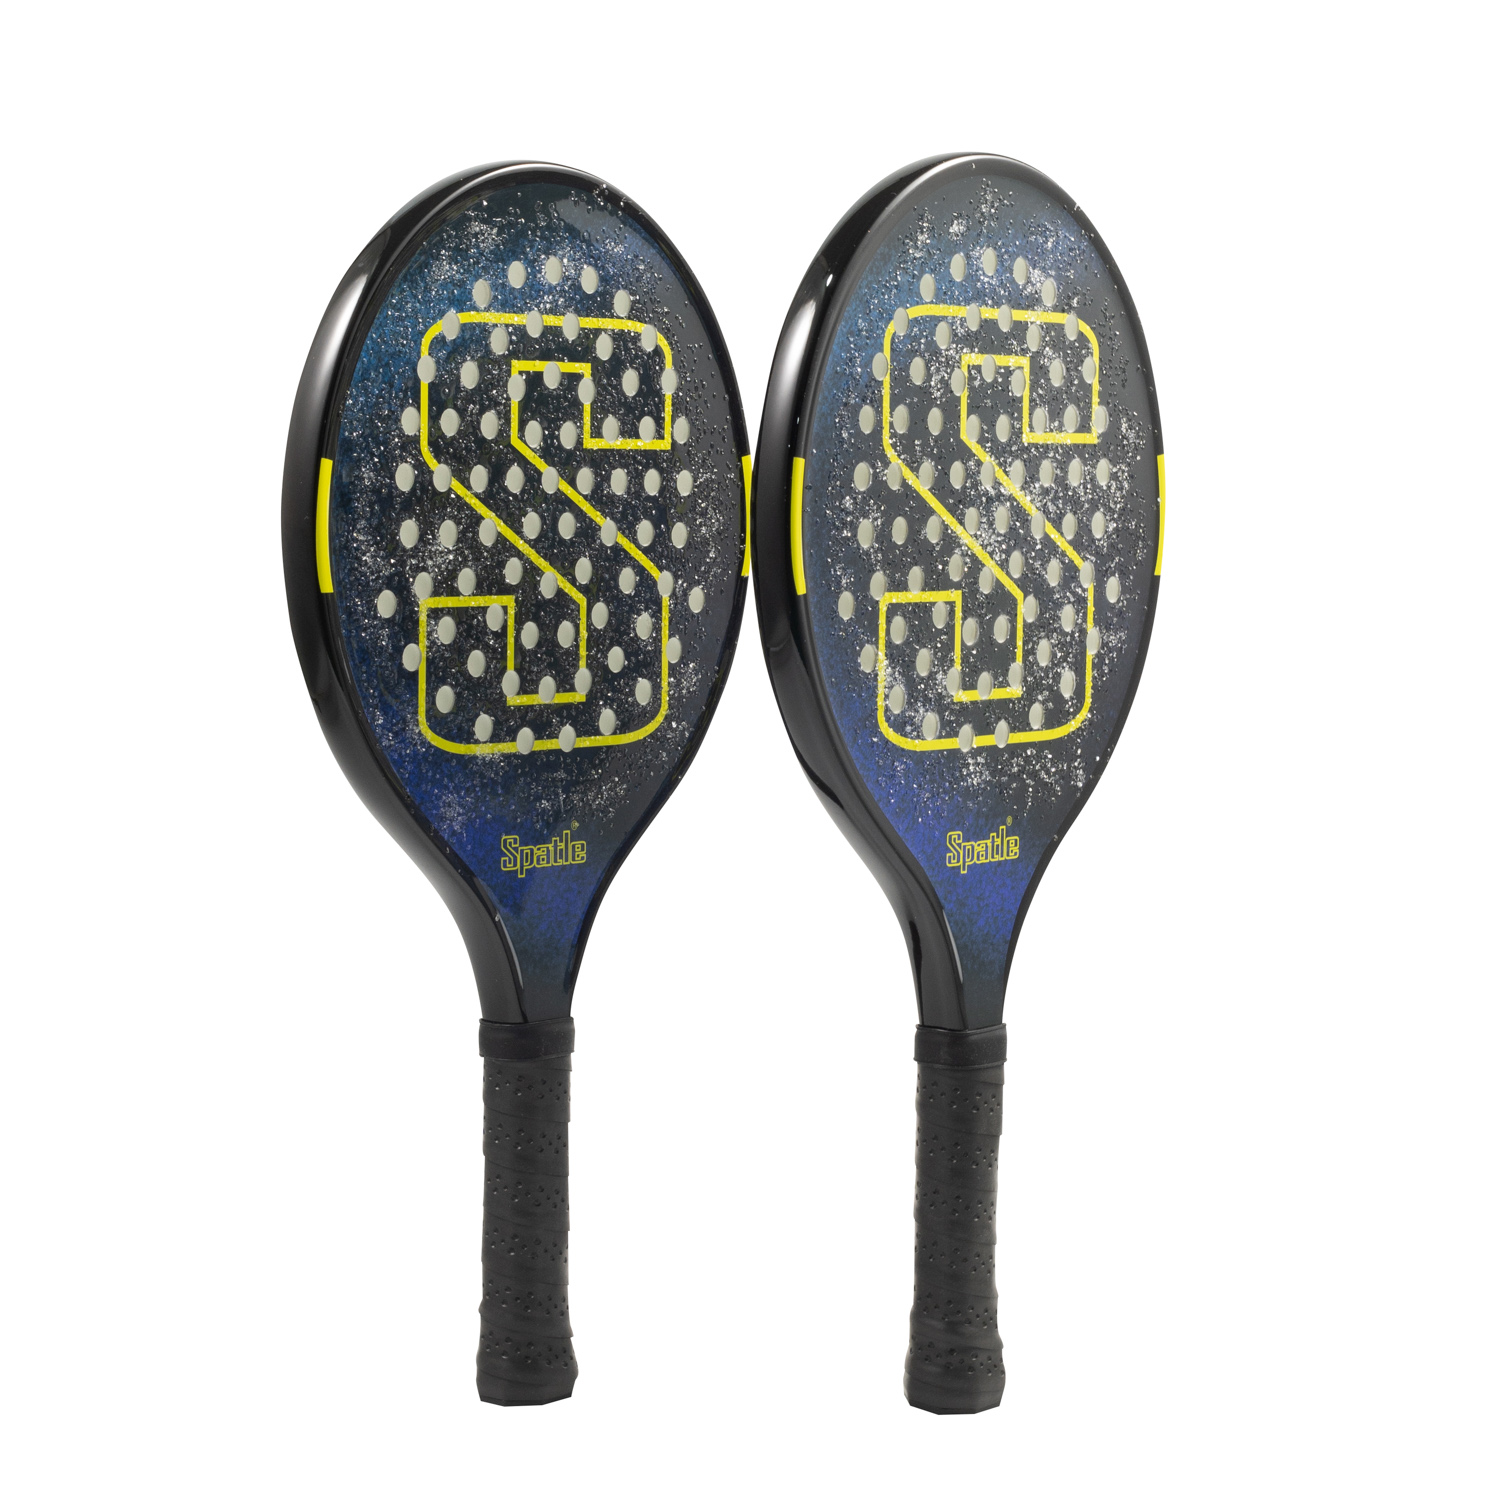 New Type Particle Glass fiber 19mm thickness Platform Tennis paddle racket